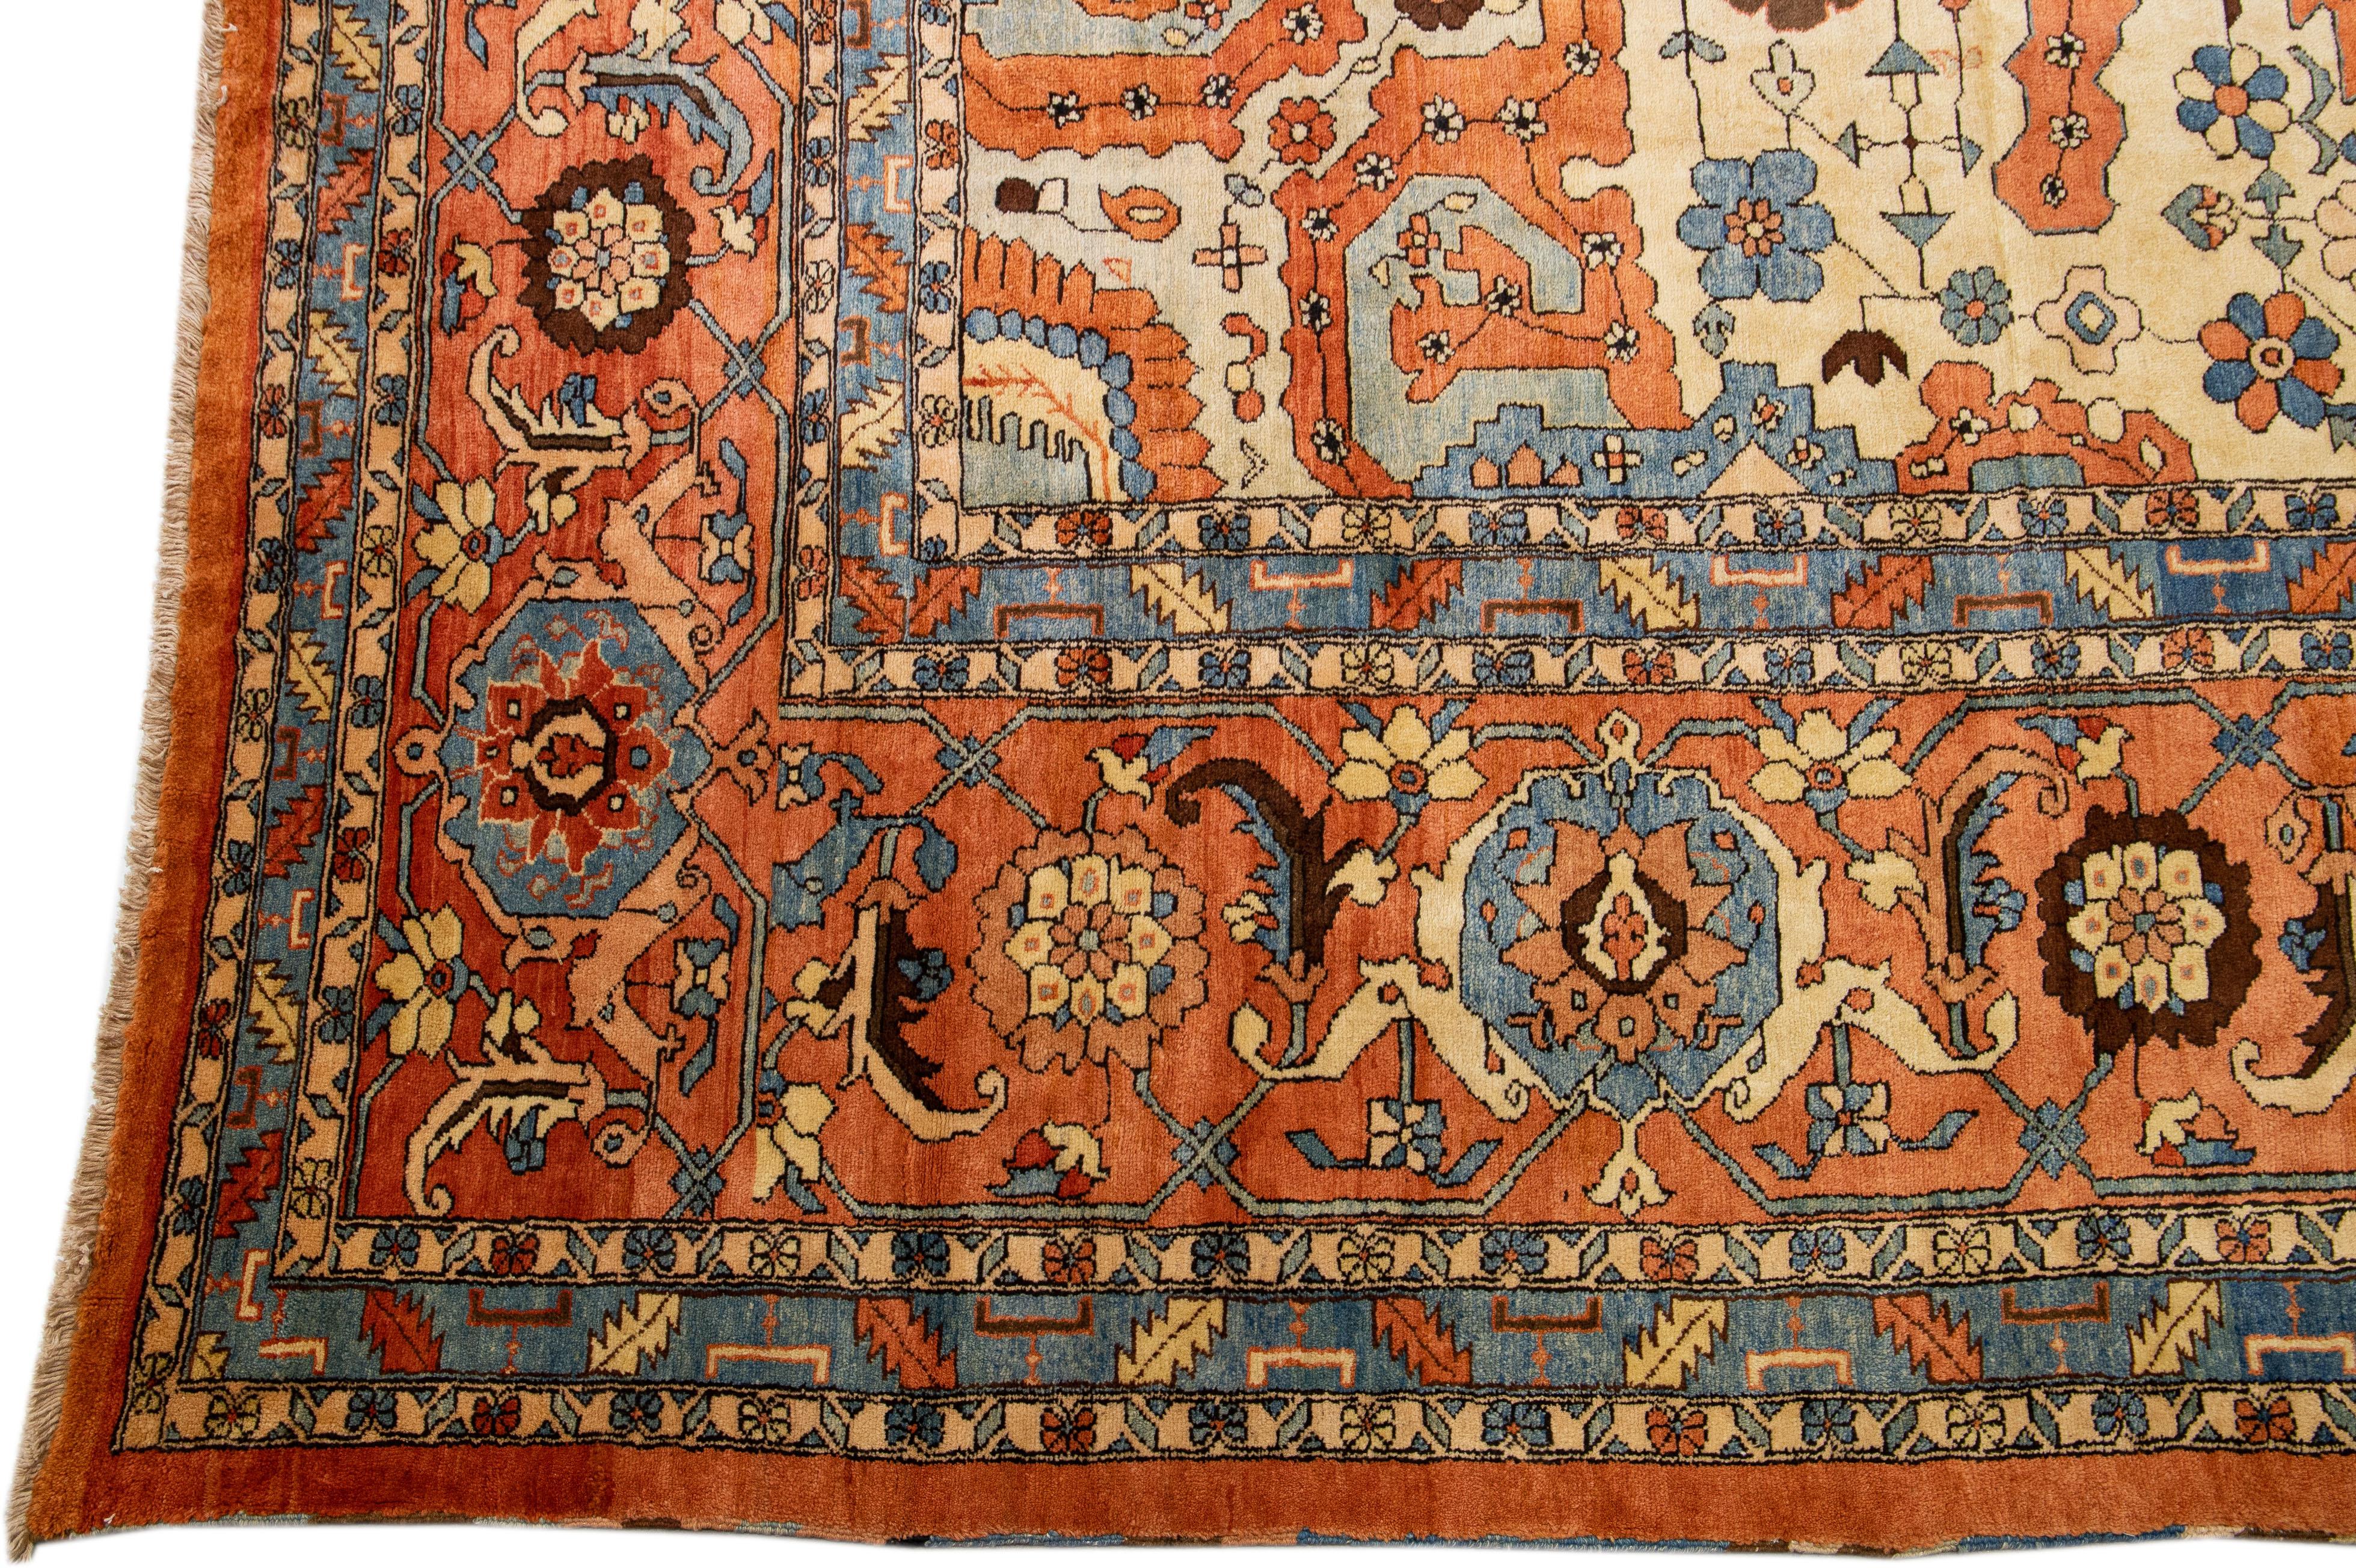 Beautiful antique Heriz hand-knotted wool rug with an orange rust color field. This Persian rug has blue and beige accents in a gorgeous center medallion floral design.

This rug measures: 18'6